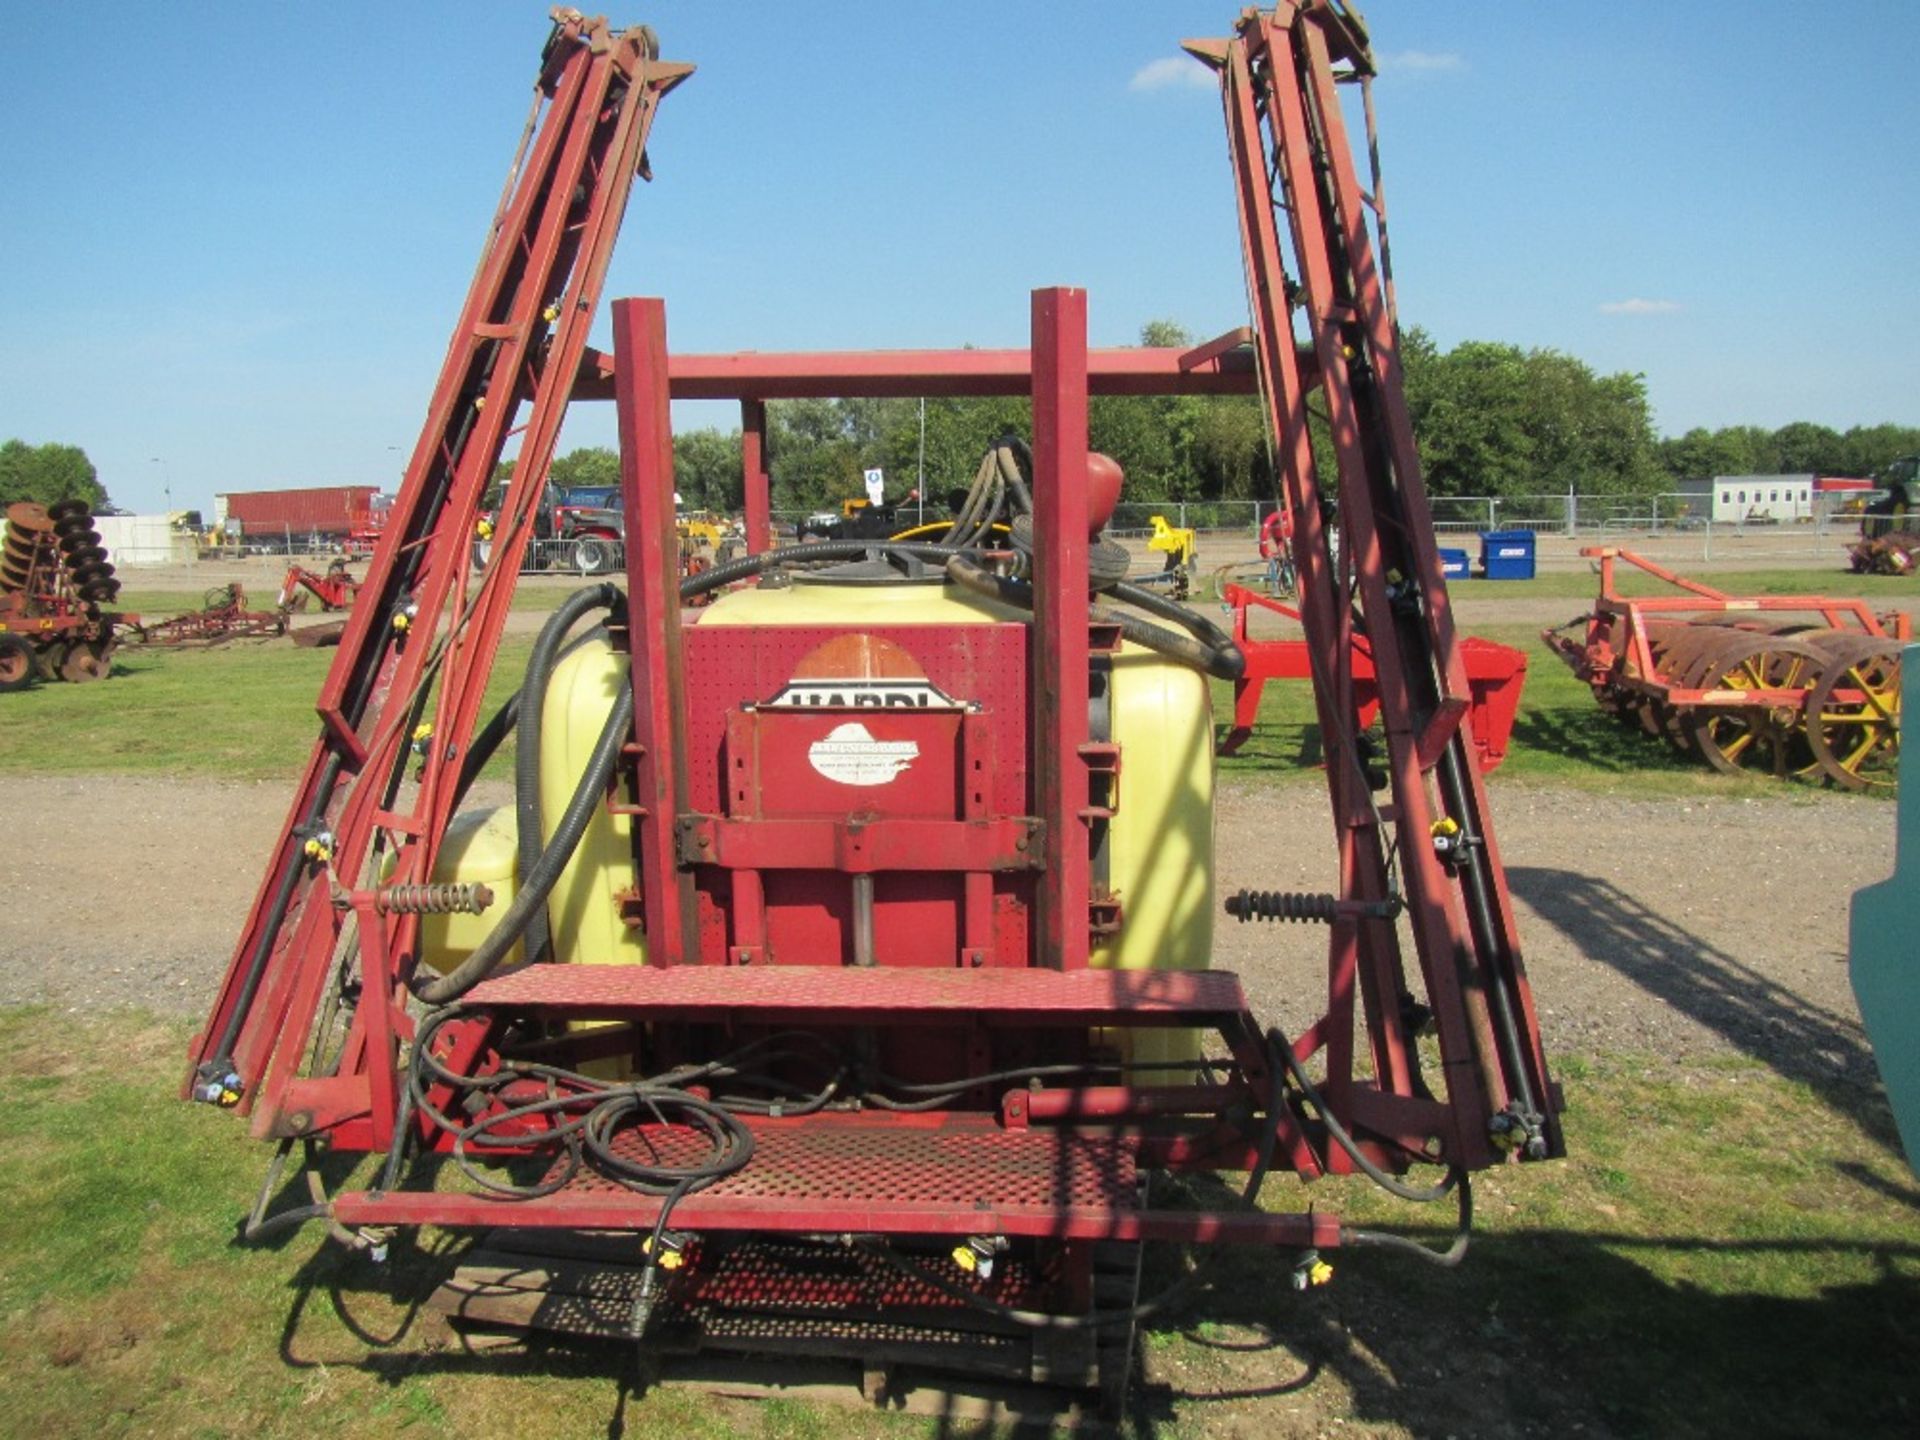 Hardi 12m Sprayer with Hyd Lift, Booms & Induction Hopper - Image 3 of 5